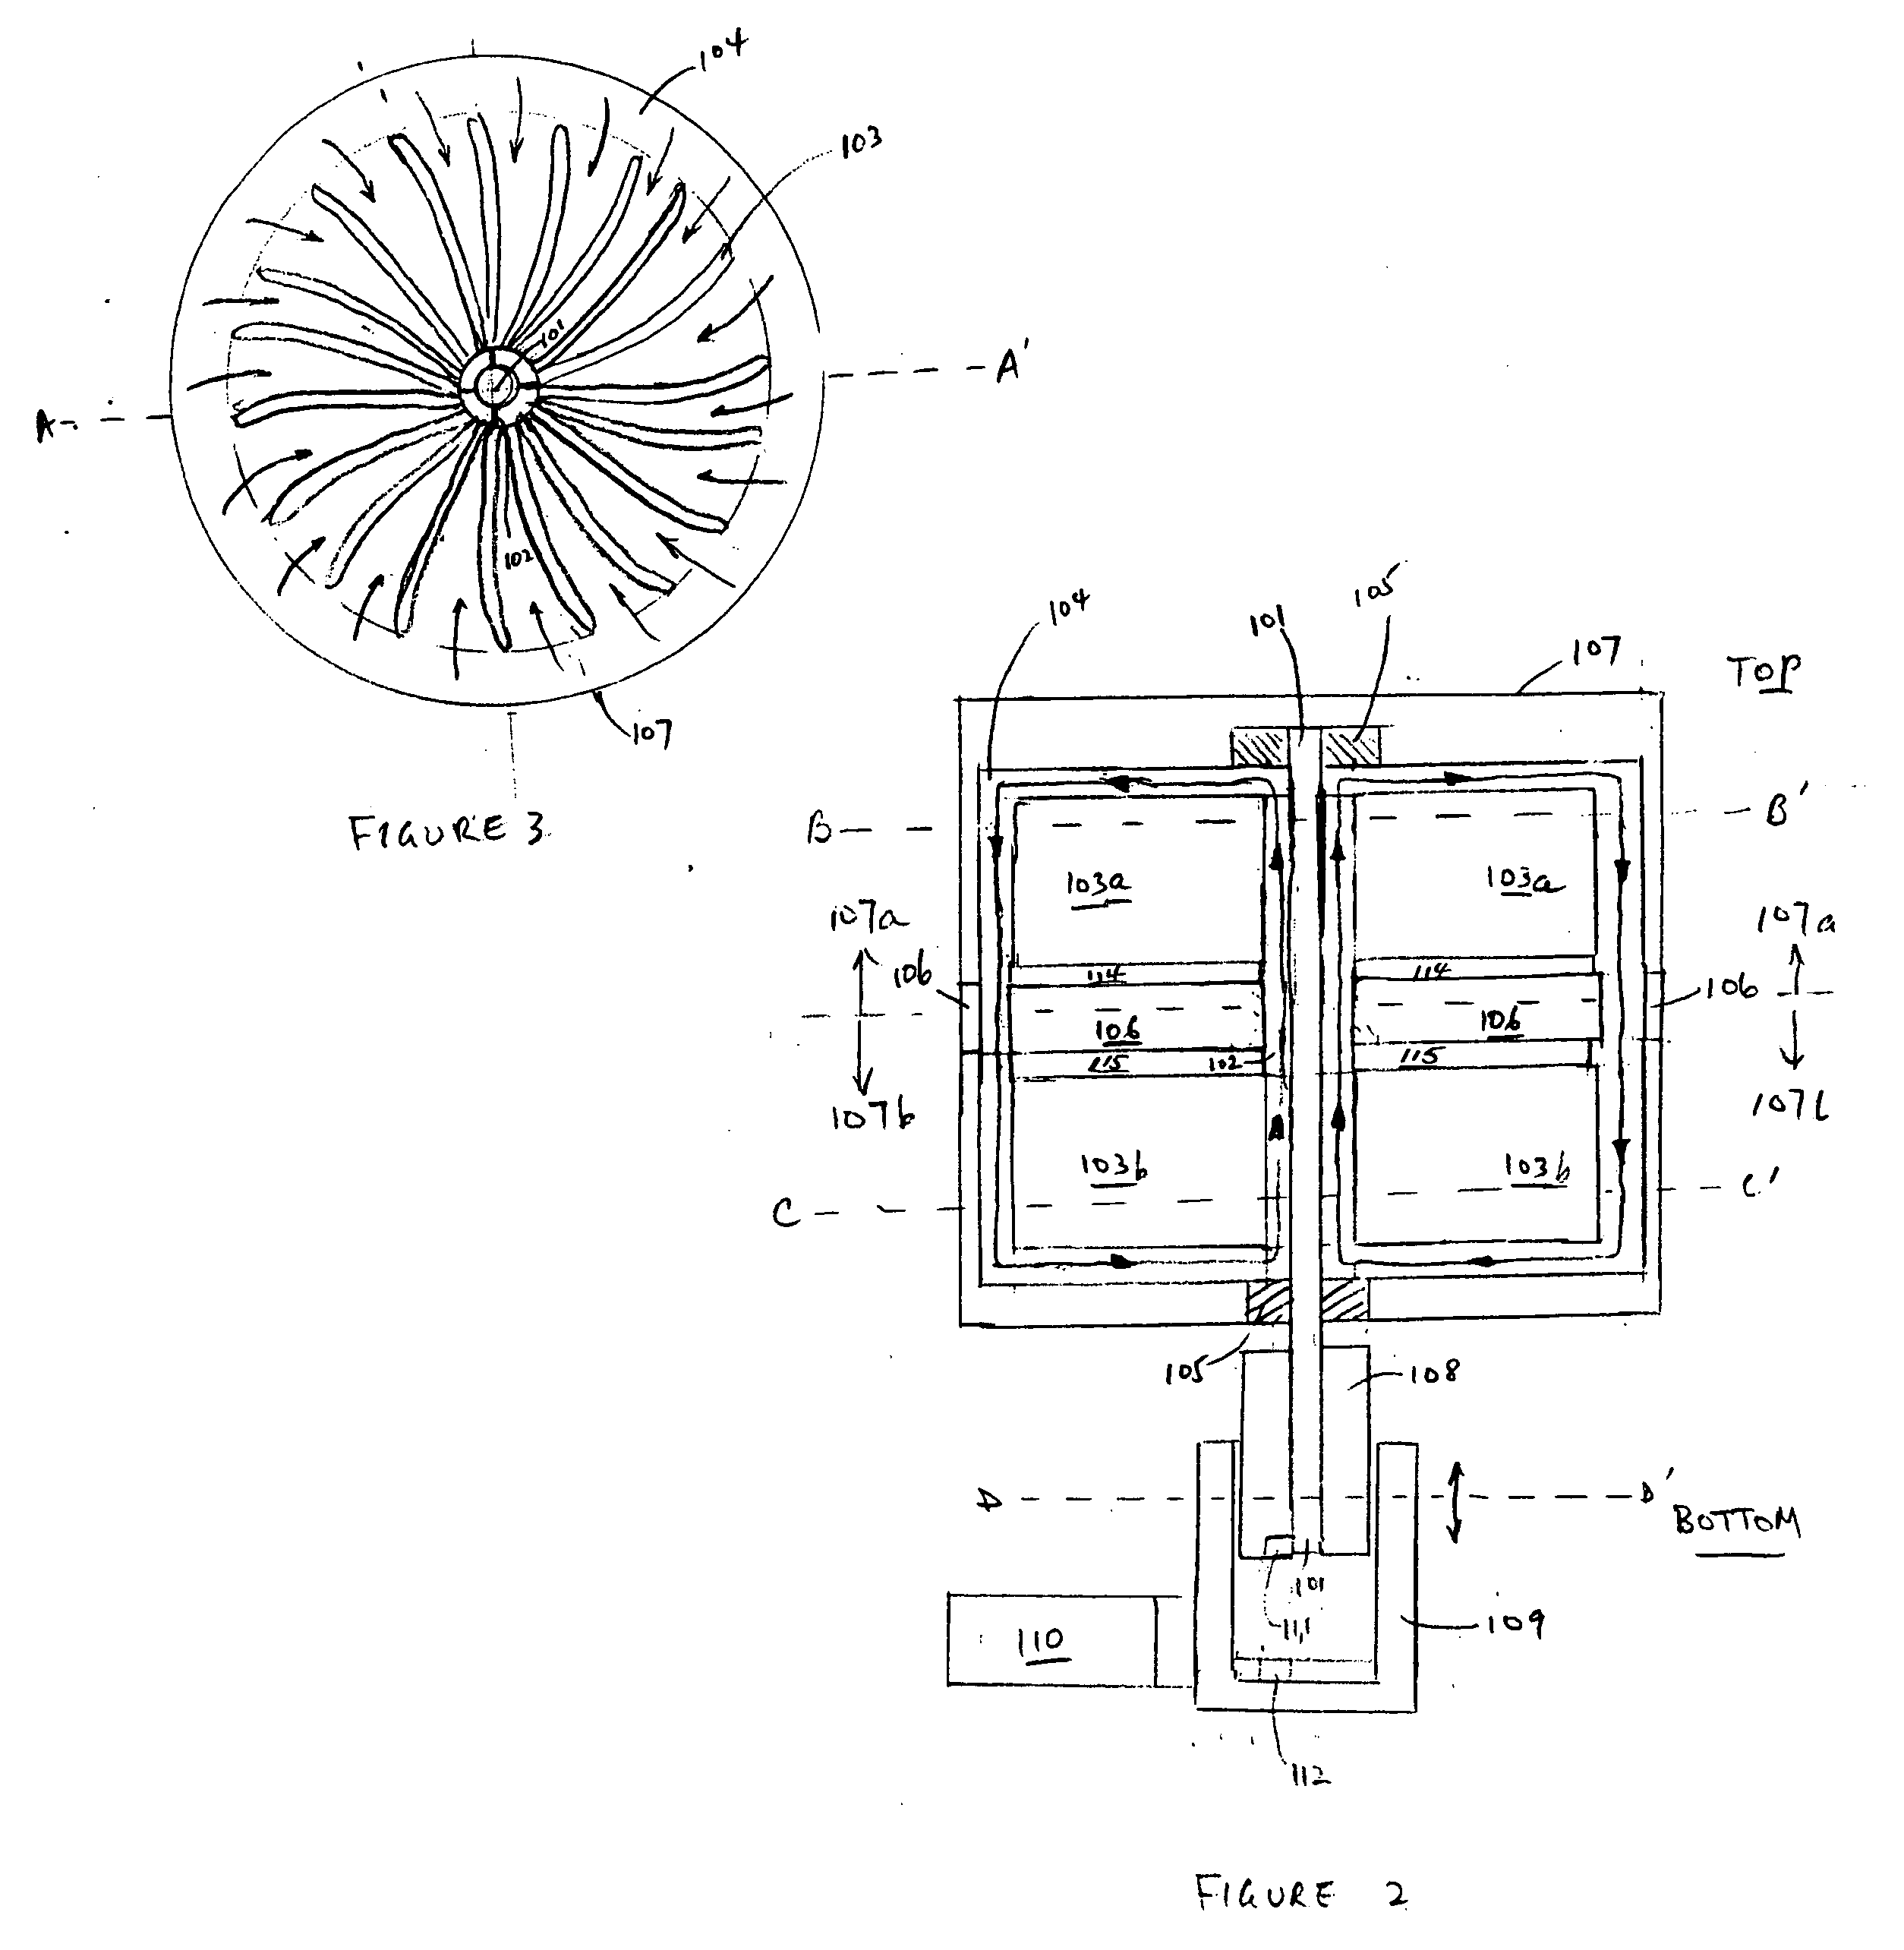 Method and system for electrical and mechanical power generation using Stirling engine principles